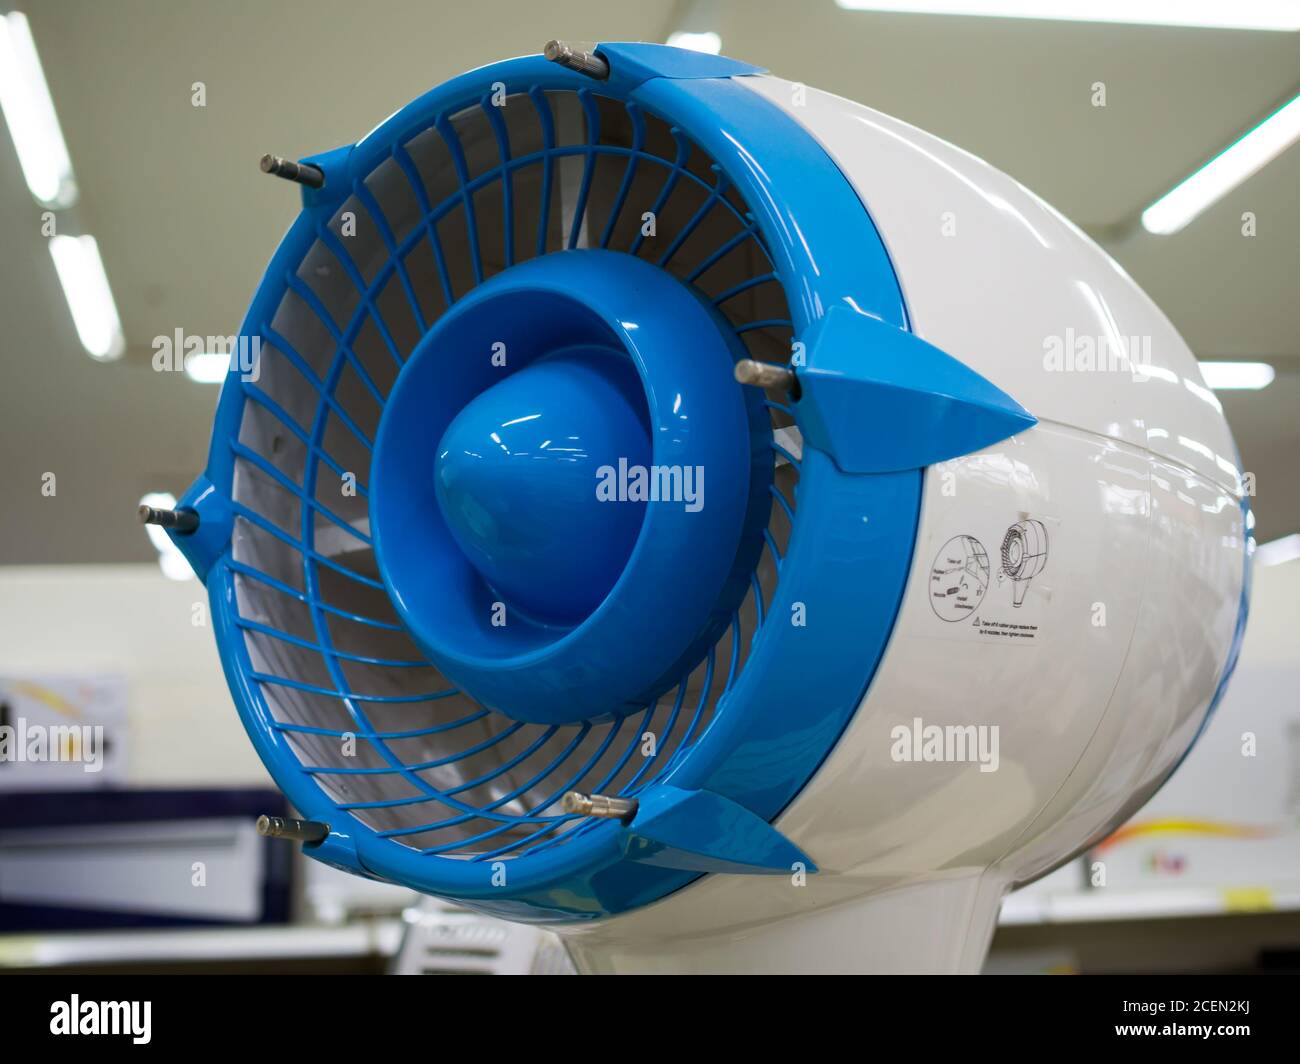 Voronezh, Russia - December 22, 2019: Fragment of a floor-standing rubble fan in the form of a turbine Stock Photo